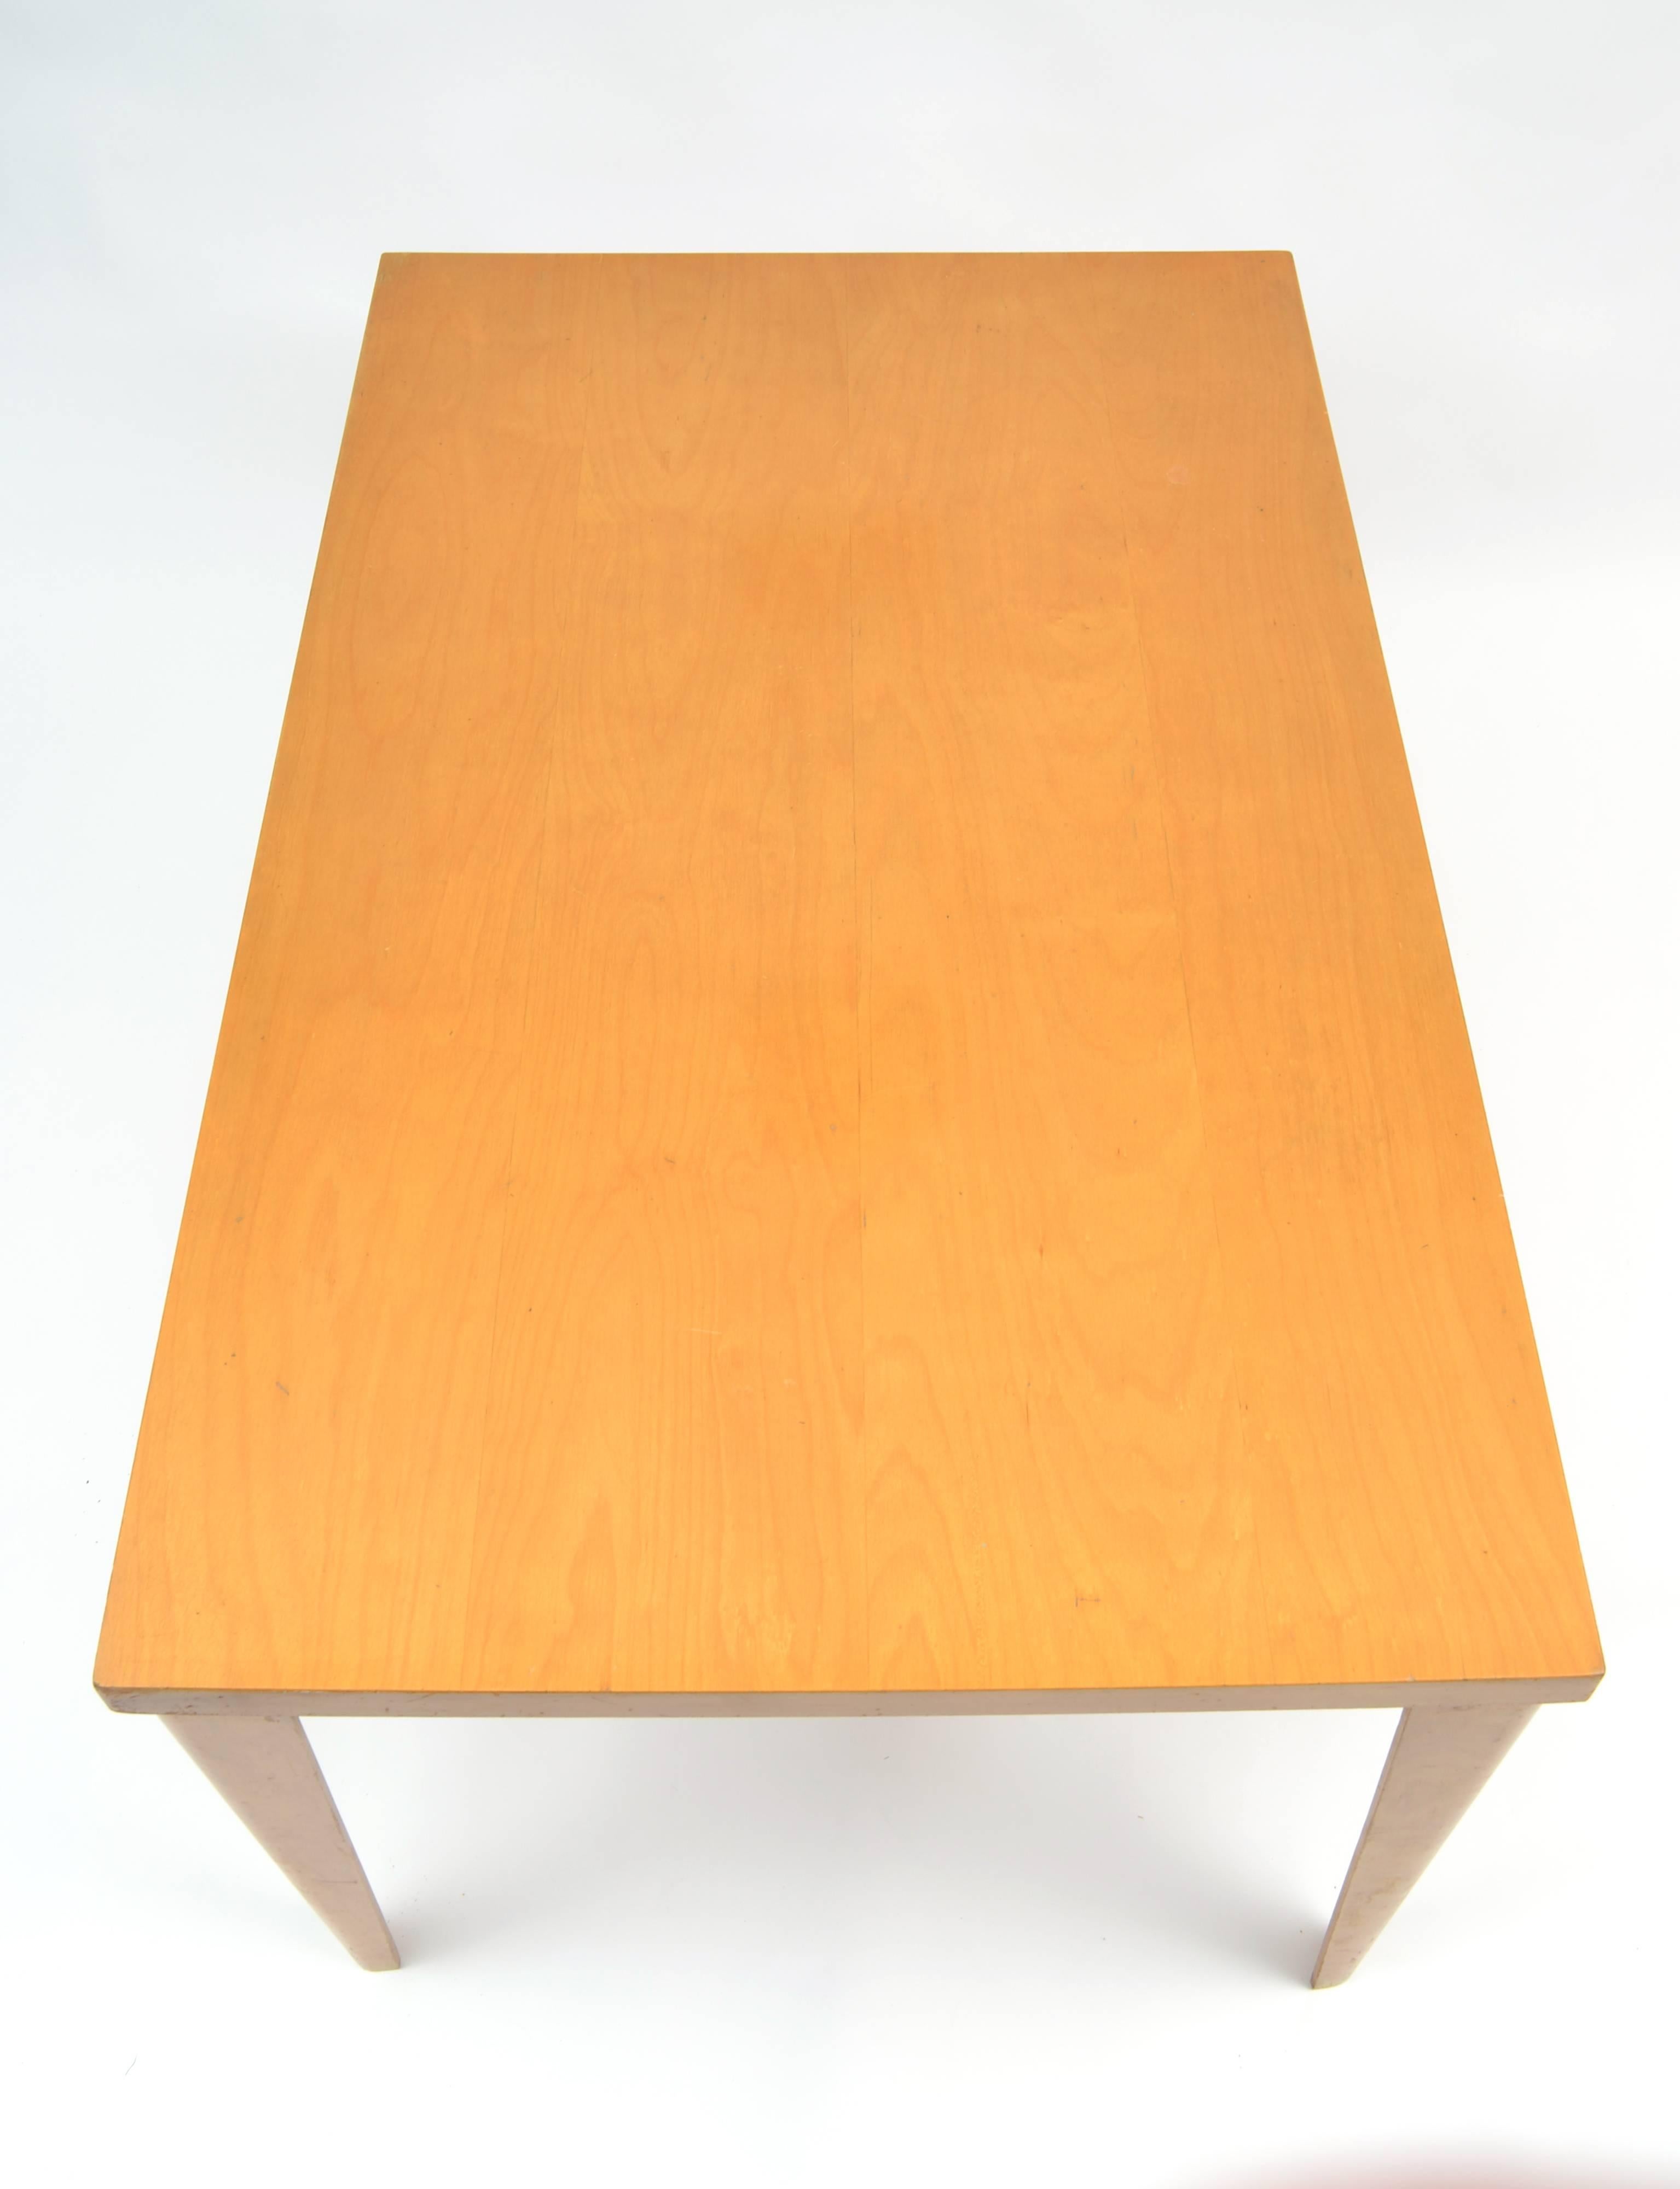 This 1940s dining table designed by Charles and Ray Eames, produced by Evans Products Company and distributed by Herman Miller is one of the earliest designs showcasing the innovative use of molded plywood. The molded birch legs are detachable and